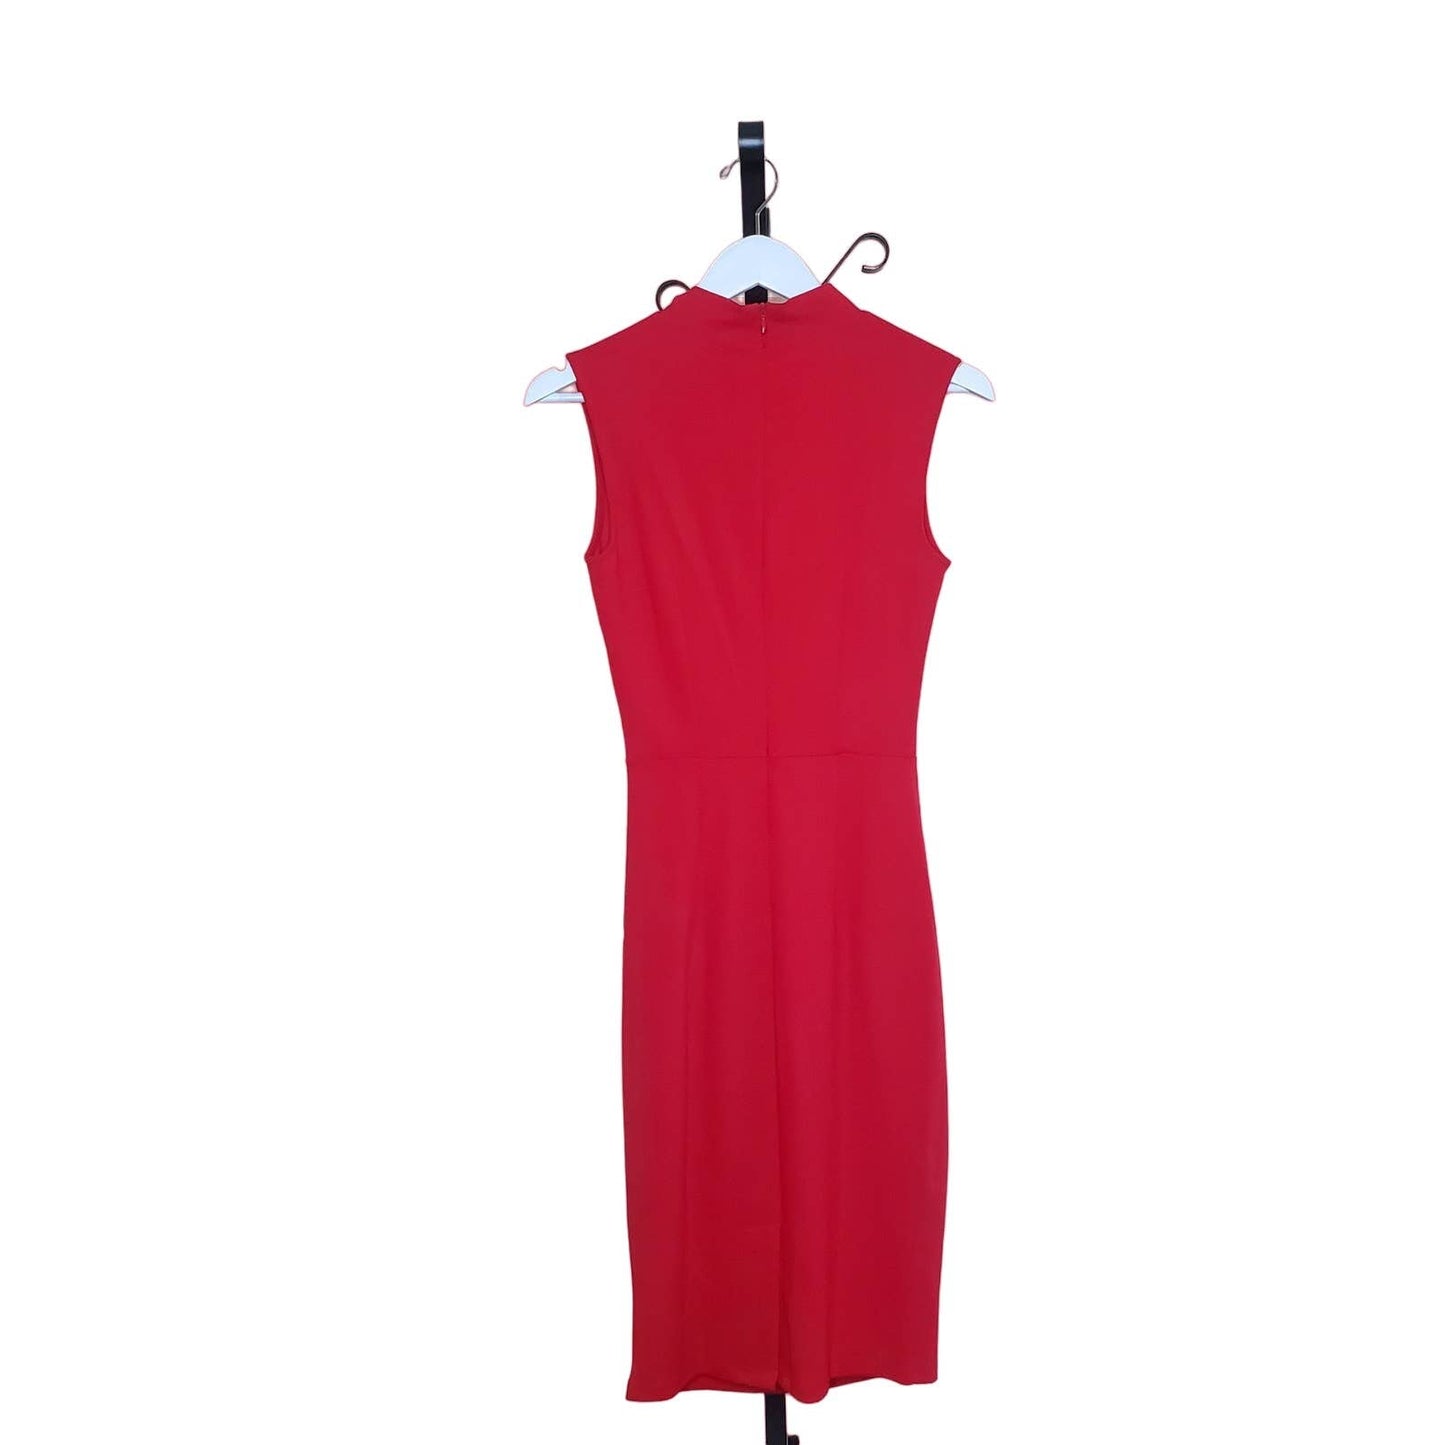 NEW Miusol Red Women's 1950's Style Ruffle Cocktail Pencil Dress, Size Small